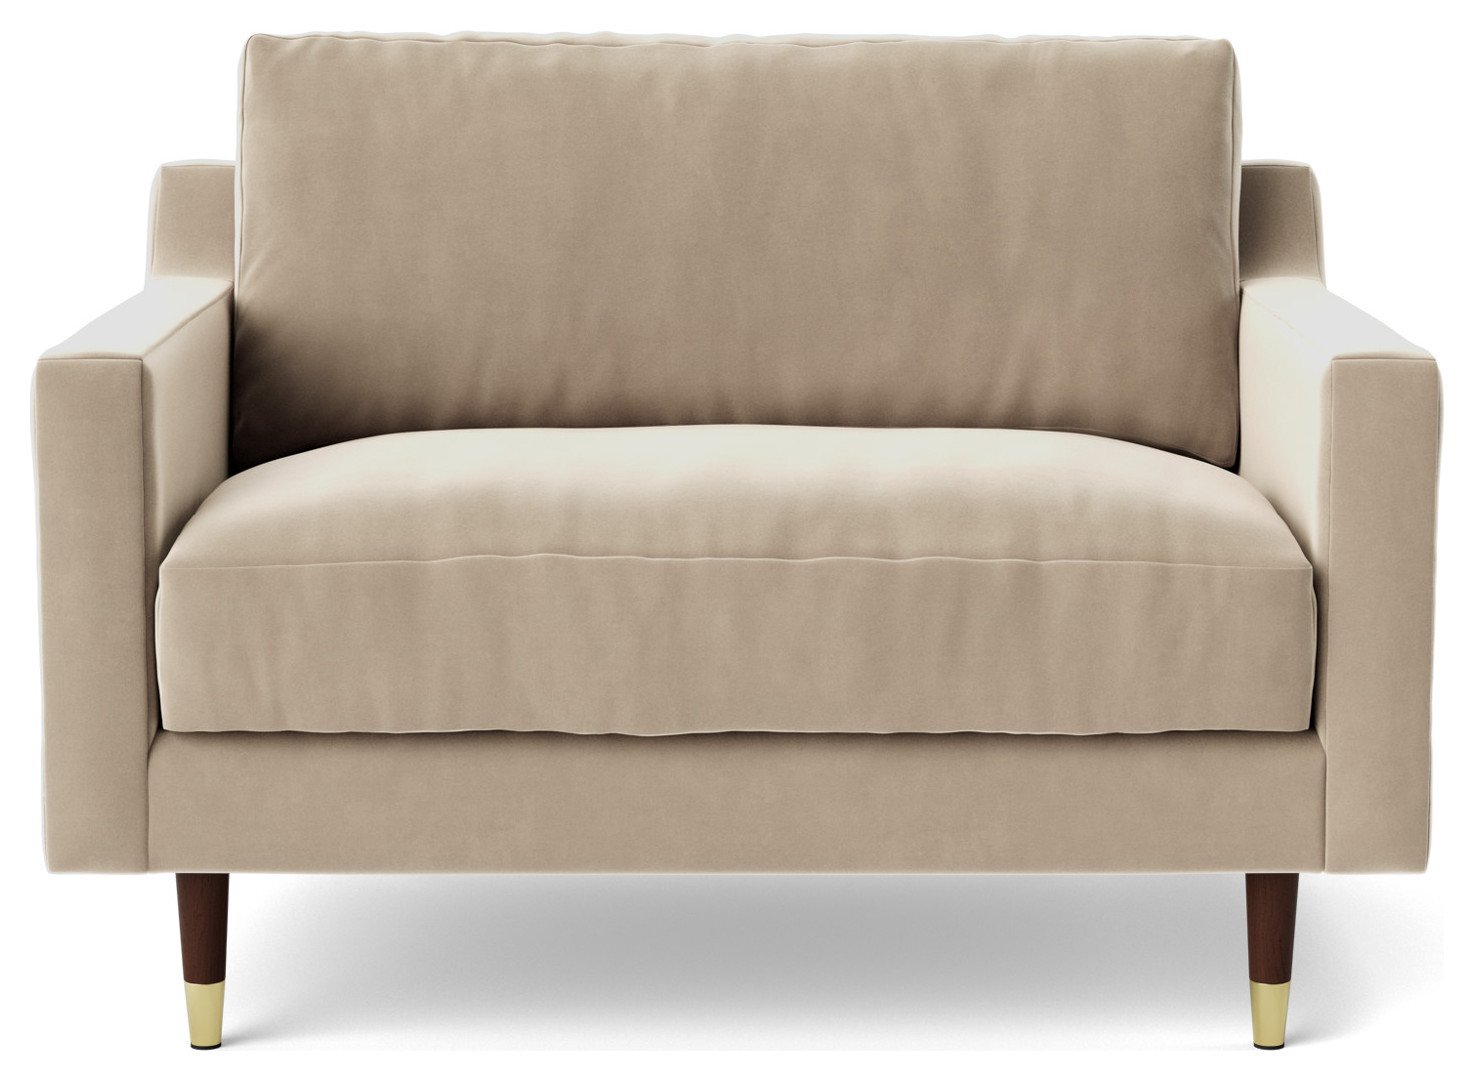 Swoon Rieti Velvet Cuddle Chair - Taupe